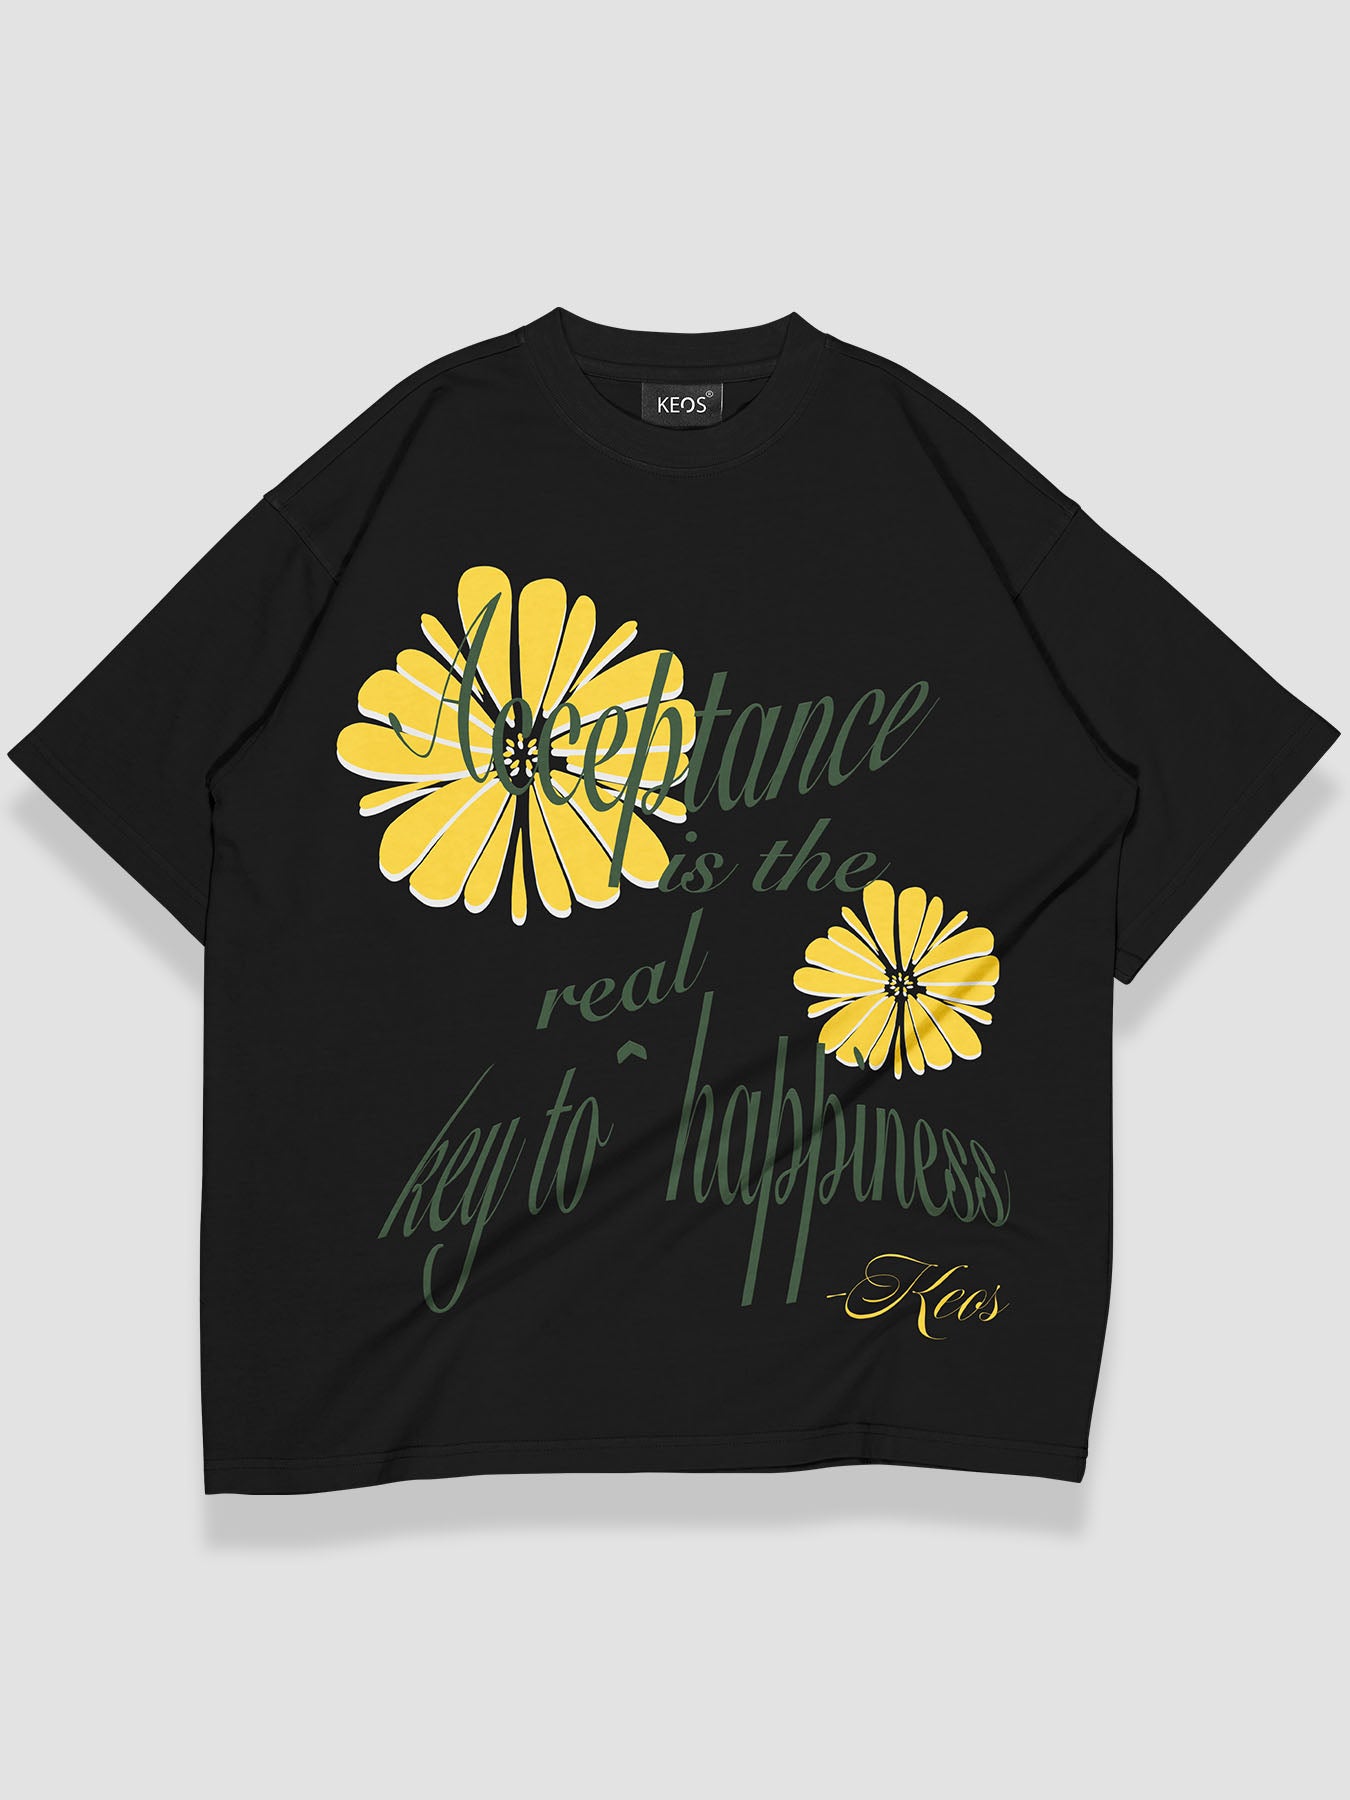 Acceptance Is The Key Urban Fit Oversize T-shirt - keos.life